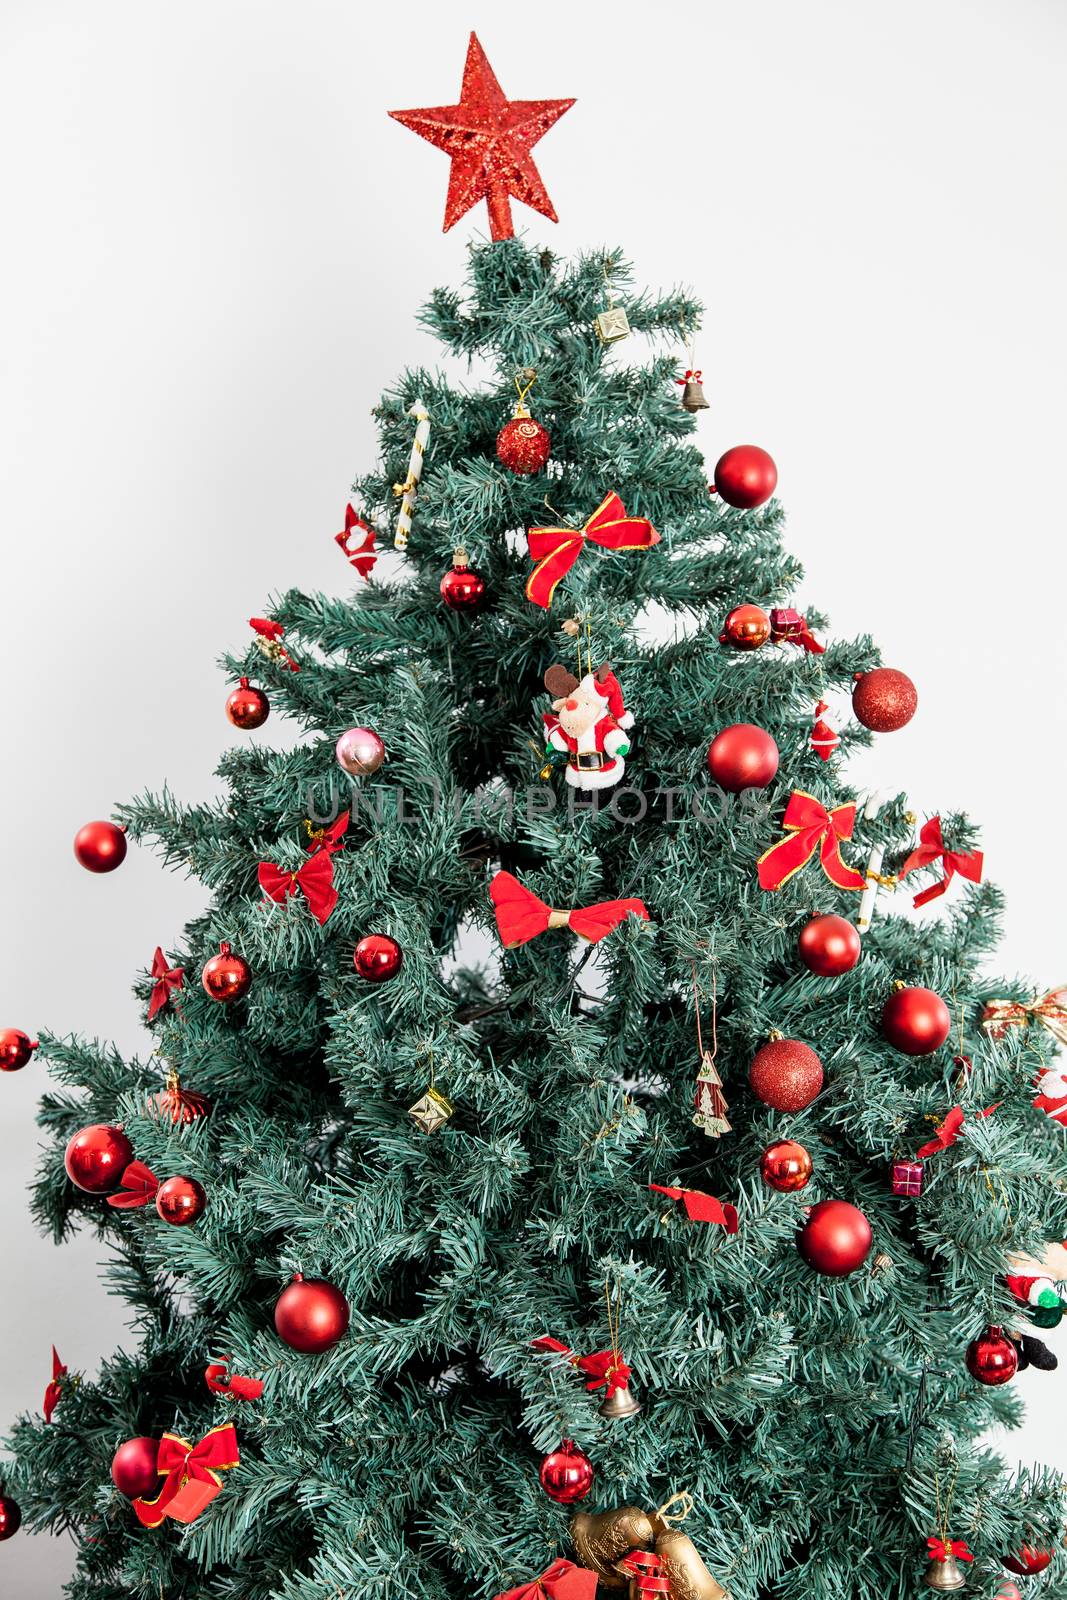 balls, beautiful, bun, celebration, christmas, colorful, decorate, decorated, decoration, festive, gifts, gold, golden, green, holiday, lights, model, new, ornament, pine, present, presents, property, red, releases, ribbon, santa, shiny, star, studio, tree, vertical, white, winter, xmas, year